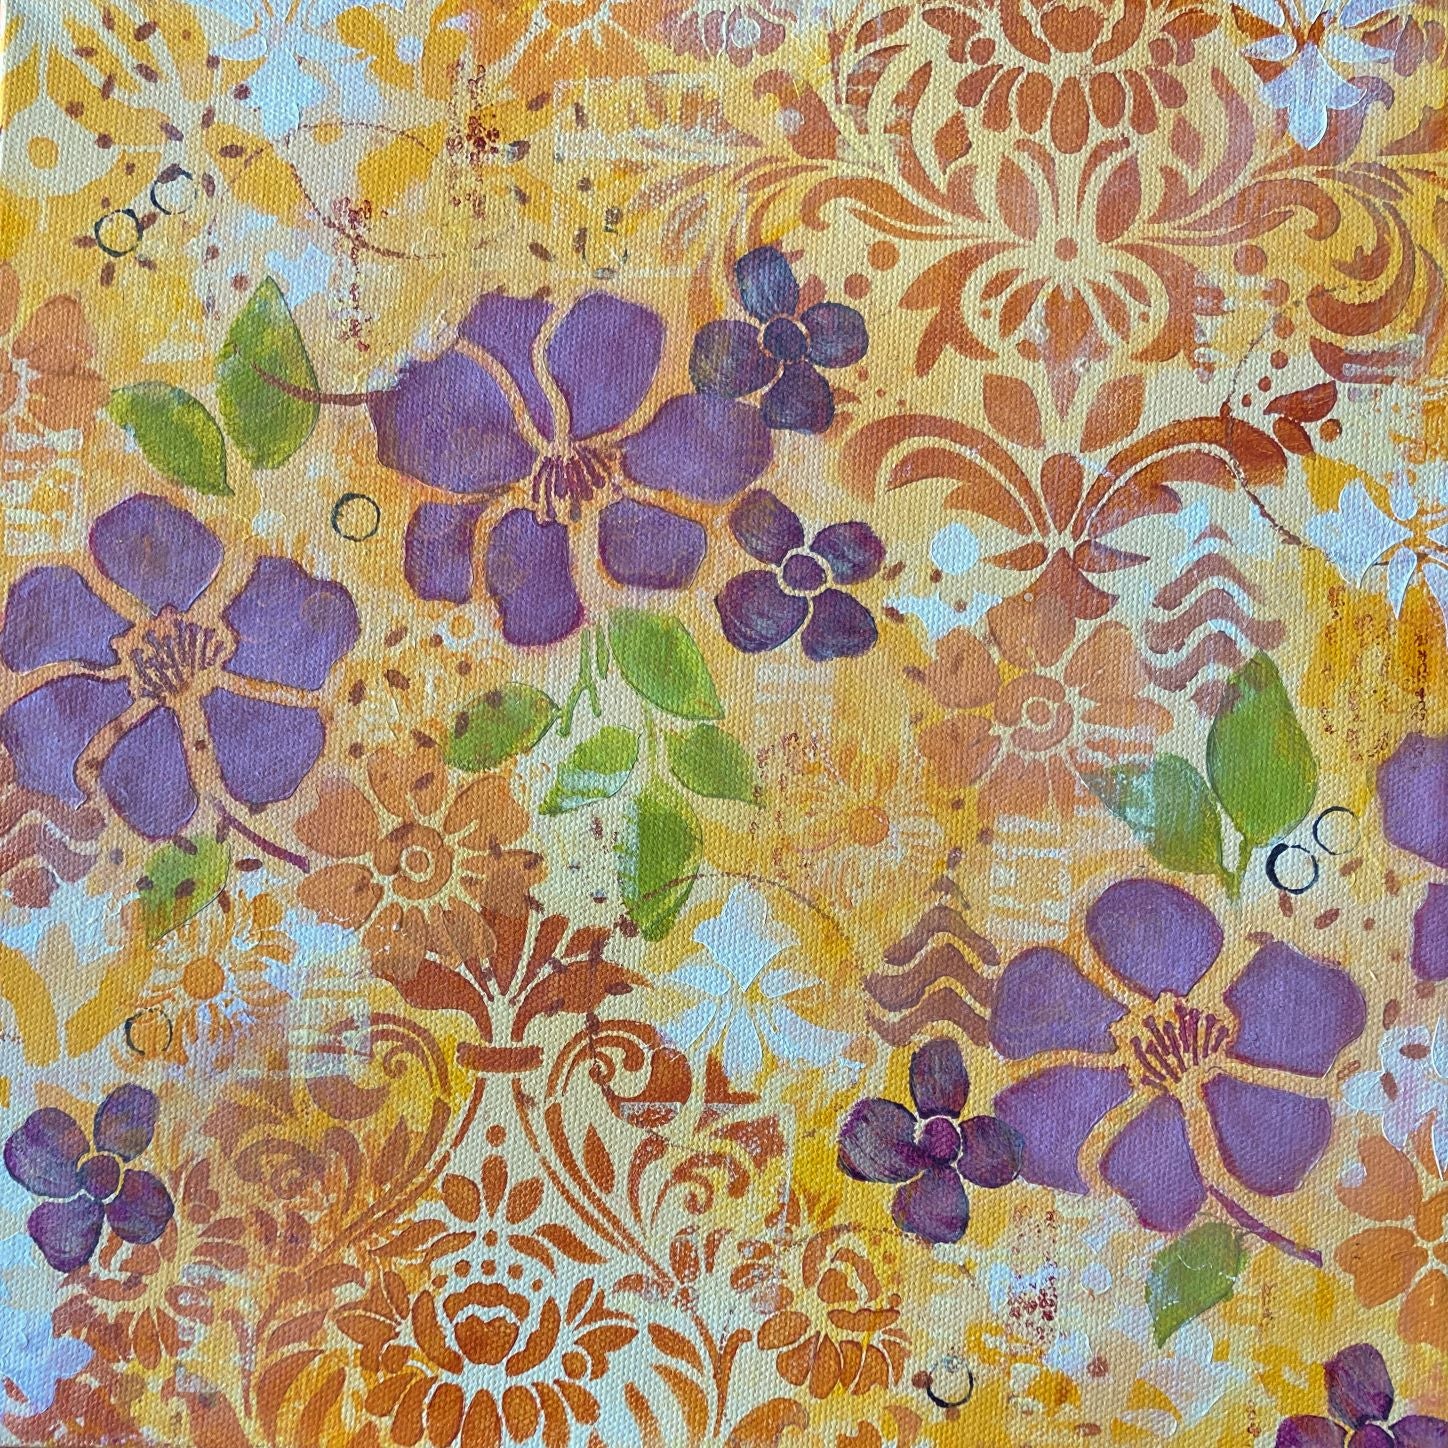 floral Hawaiian theme acrylic painting on canvas purple flowers orange flowers green leaves circles and scrolling shapes warm and cheerful